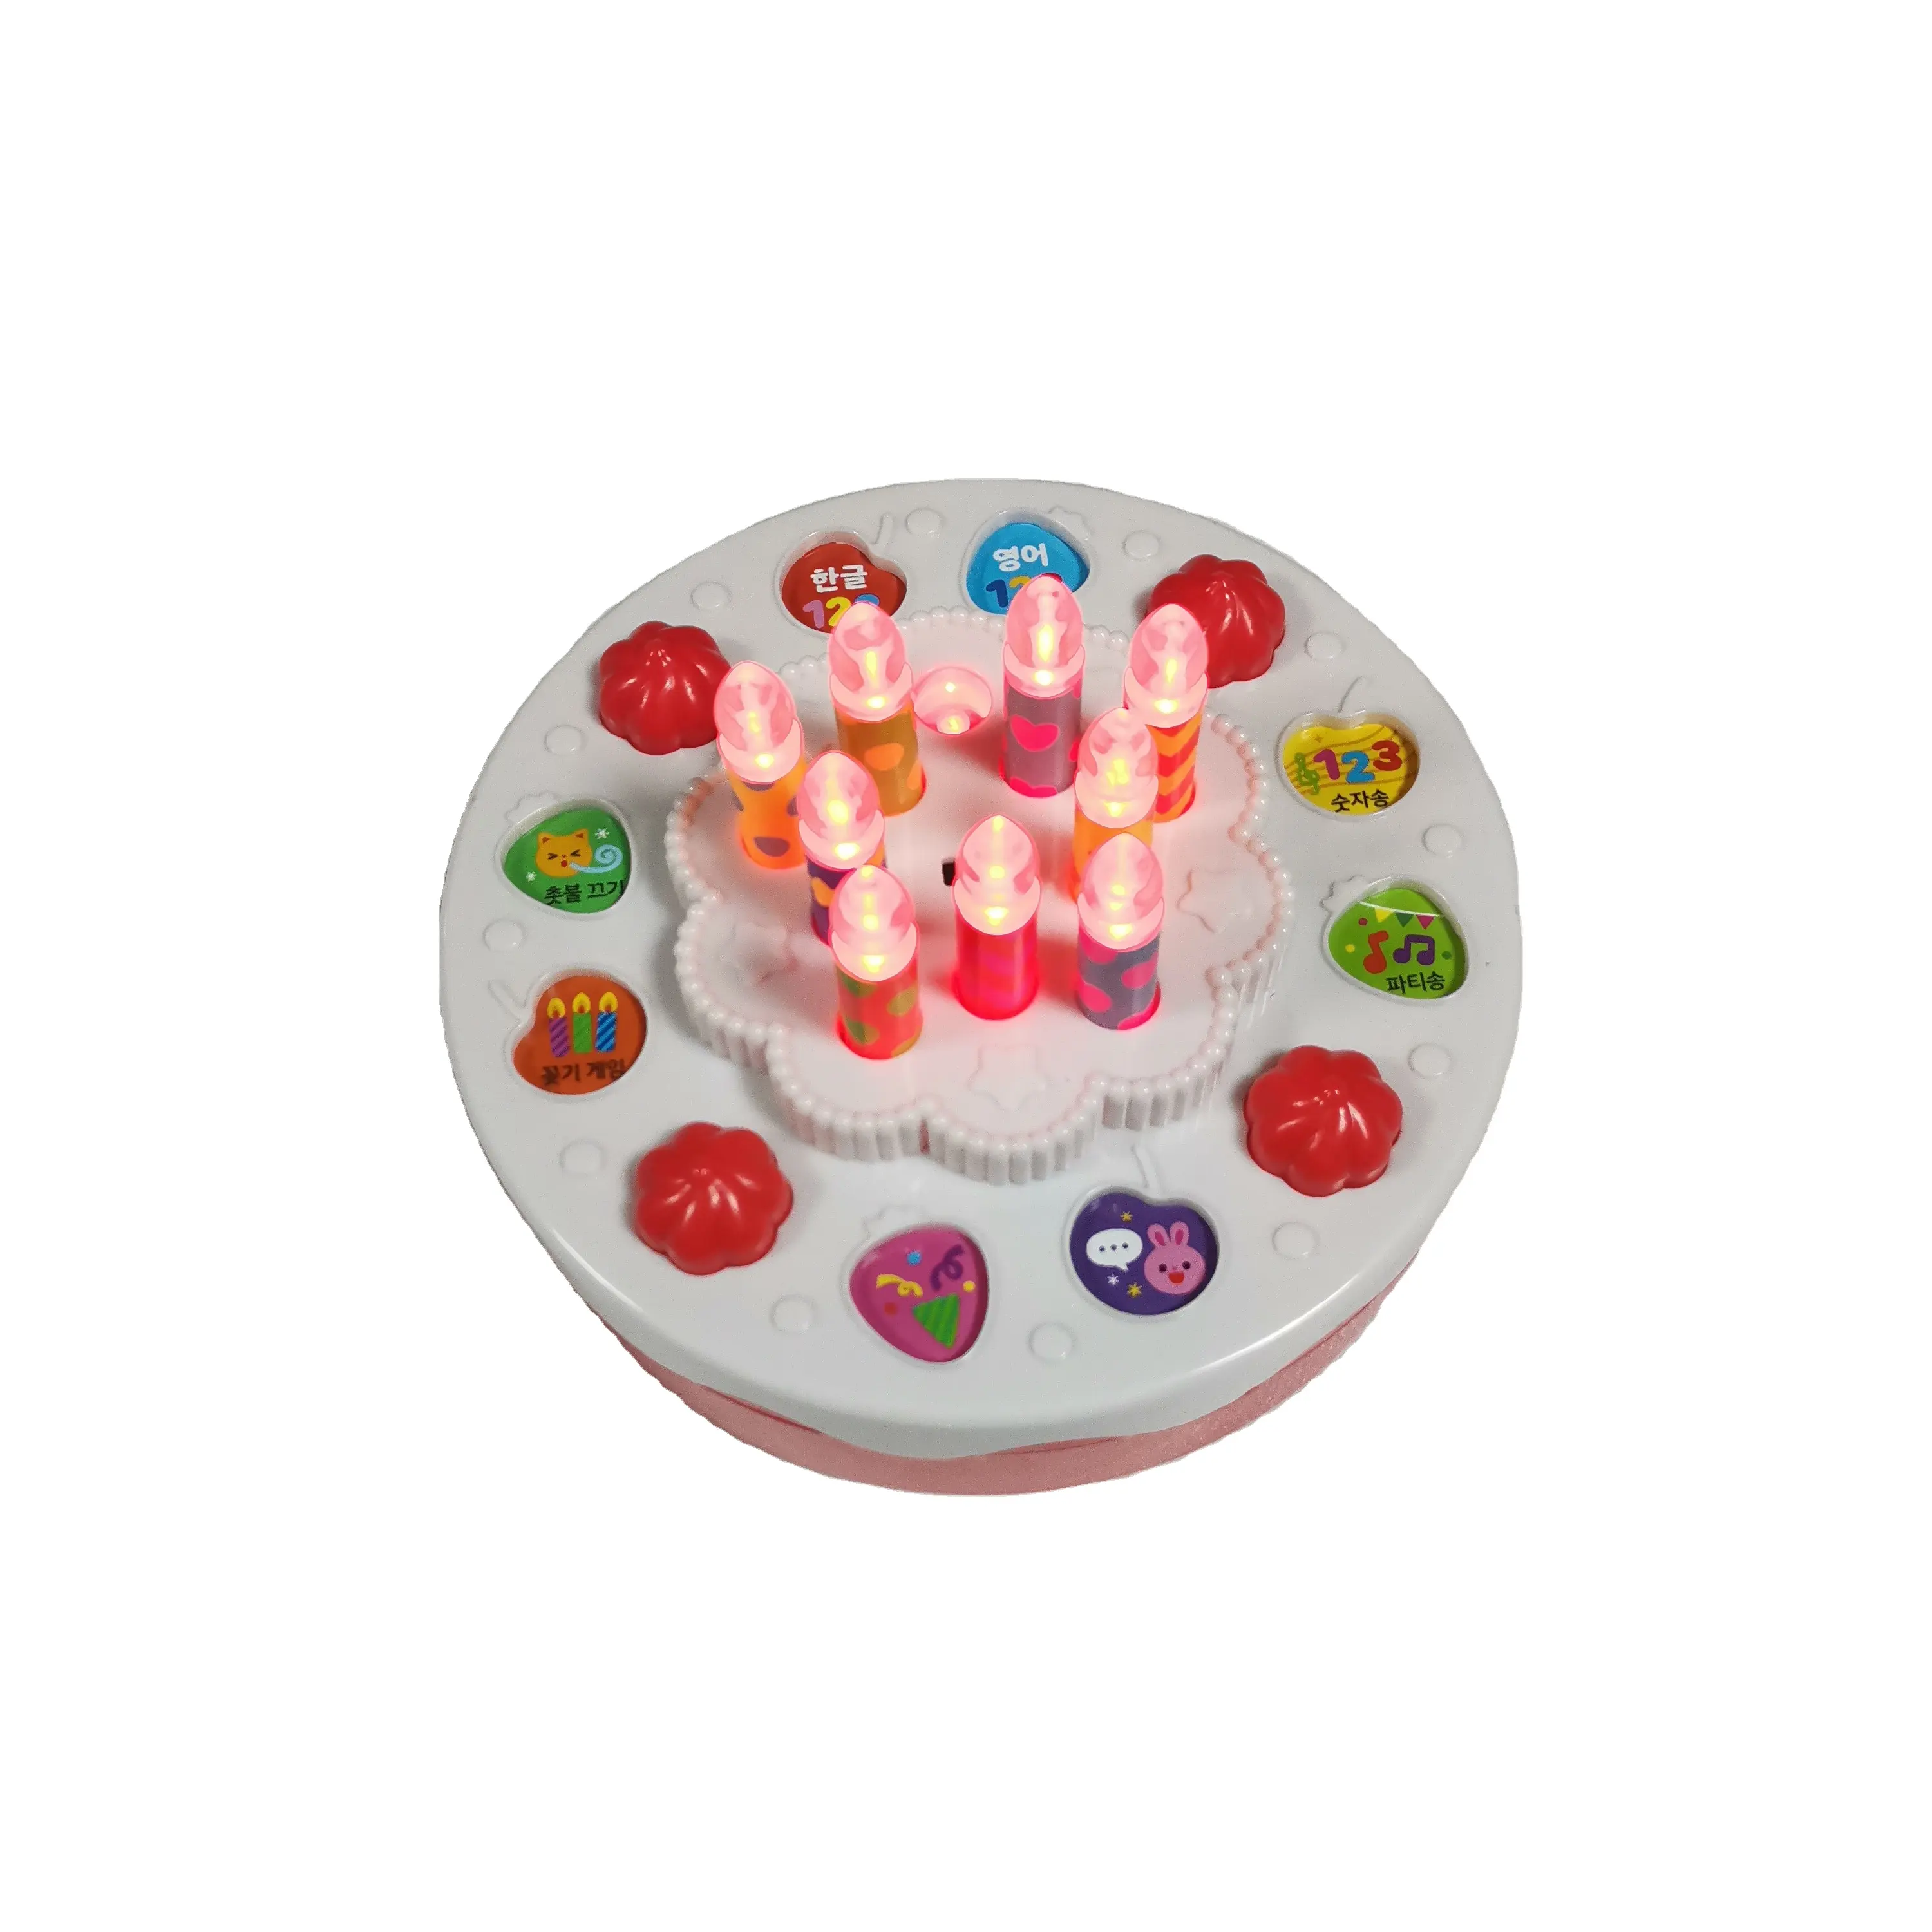 Customized Kids Birthday Cake Musical Toys With LED Flash Lights Interactive Music Toys For Kids Birthday Celebration